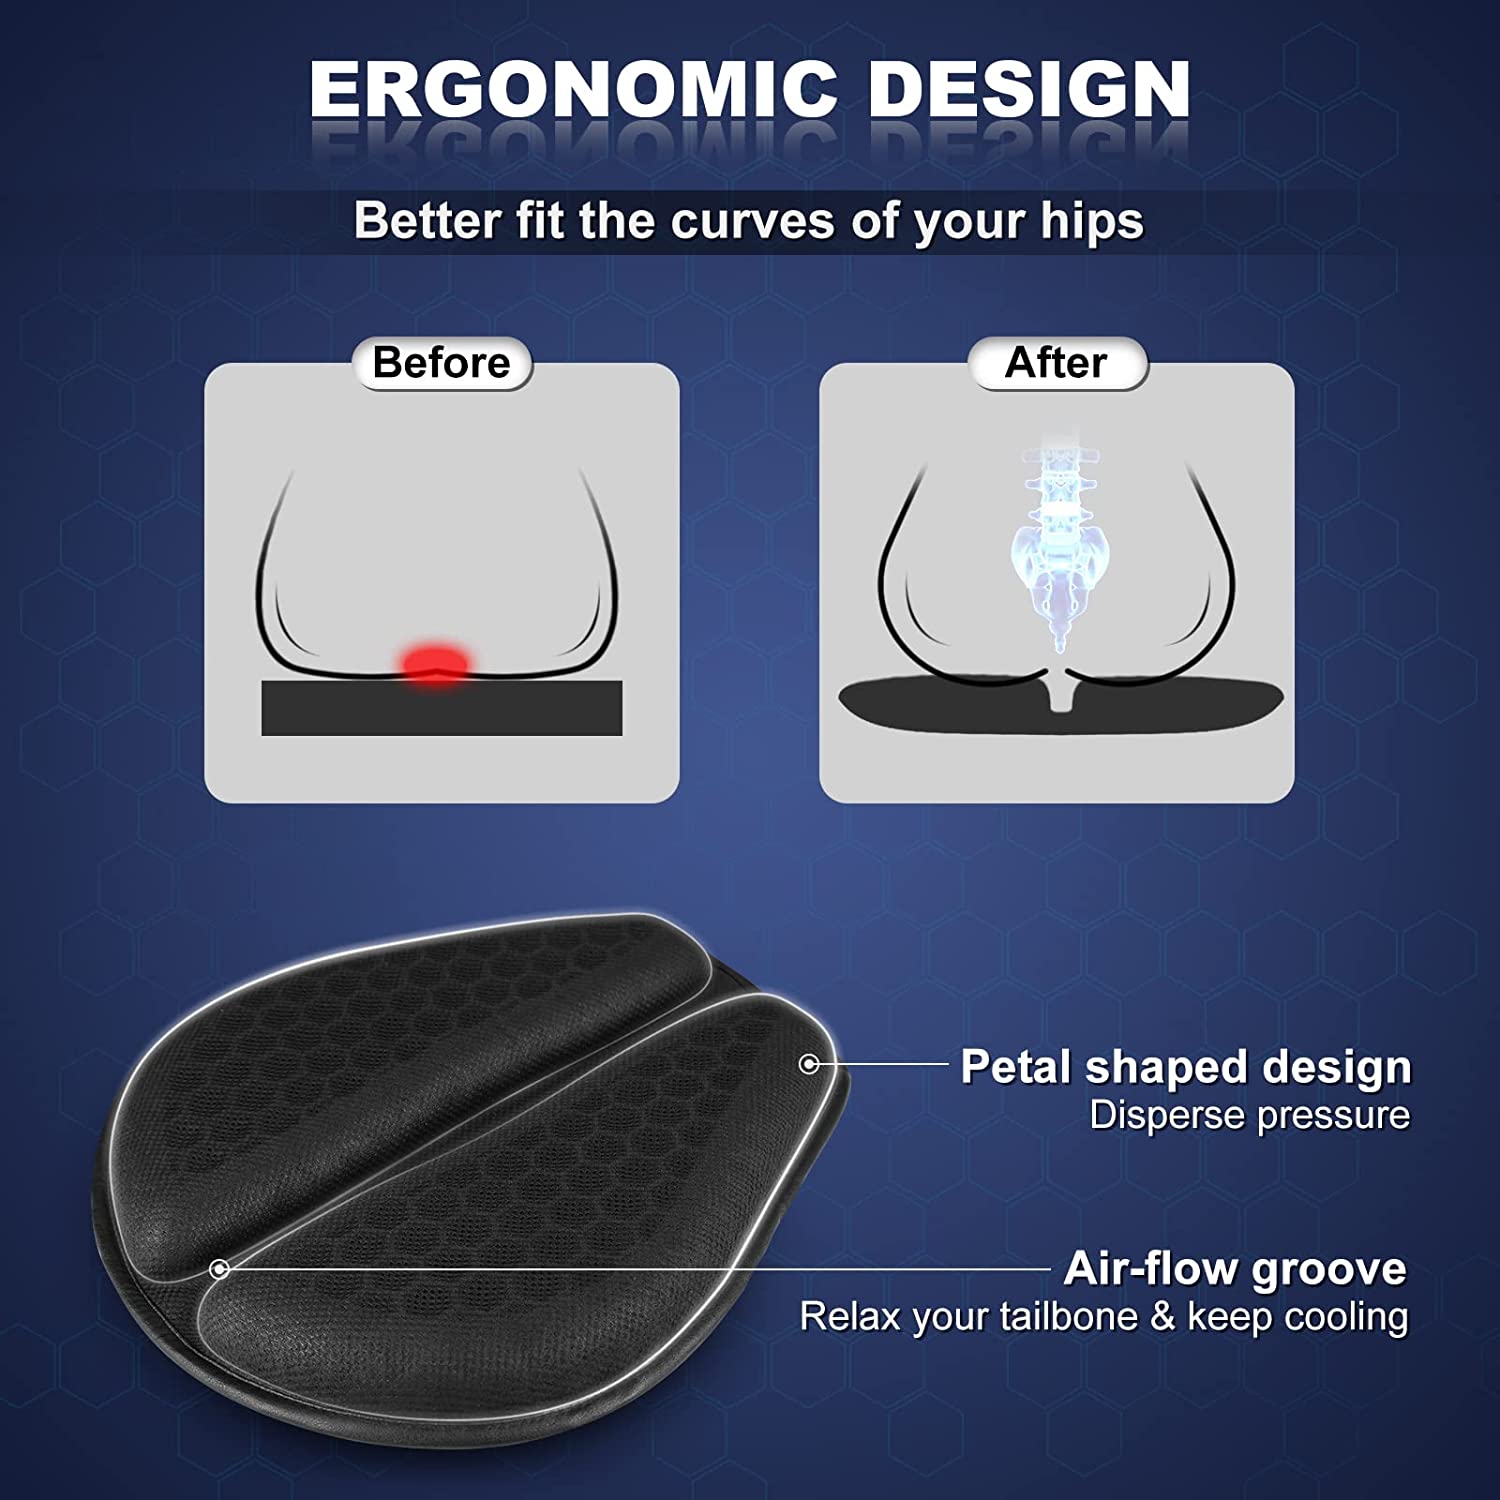 Universal Motorcycle Seat Cushion - 71oIvc1nD6L. AC SL1500 74e11cce 76d3 4fc1 a8ee 8a5a69ed5f66